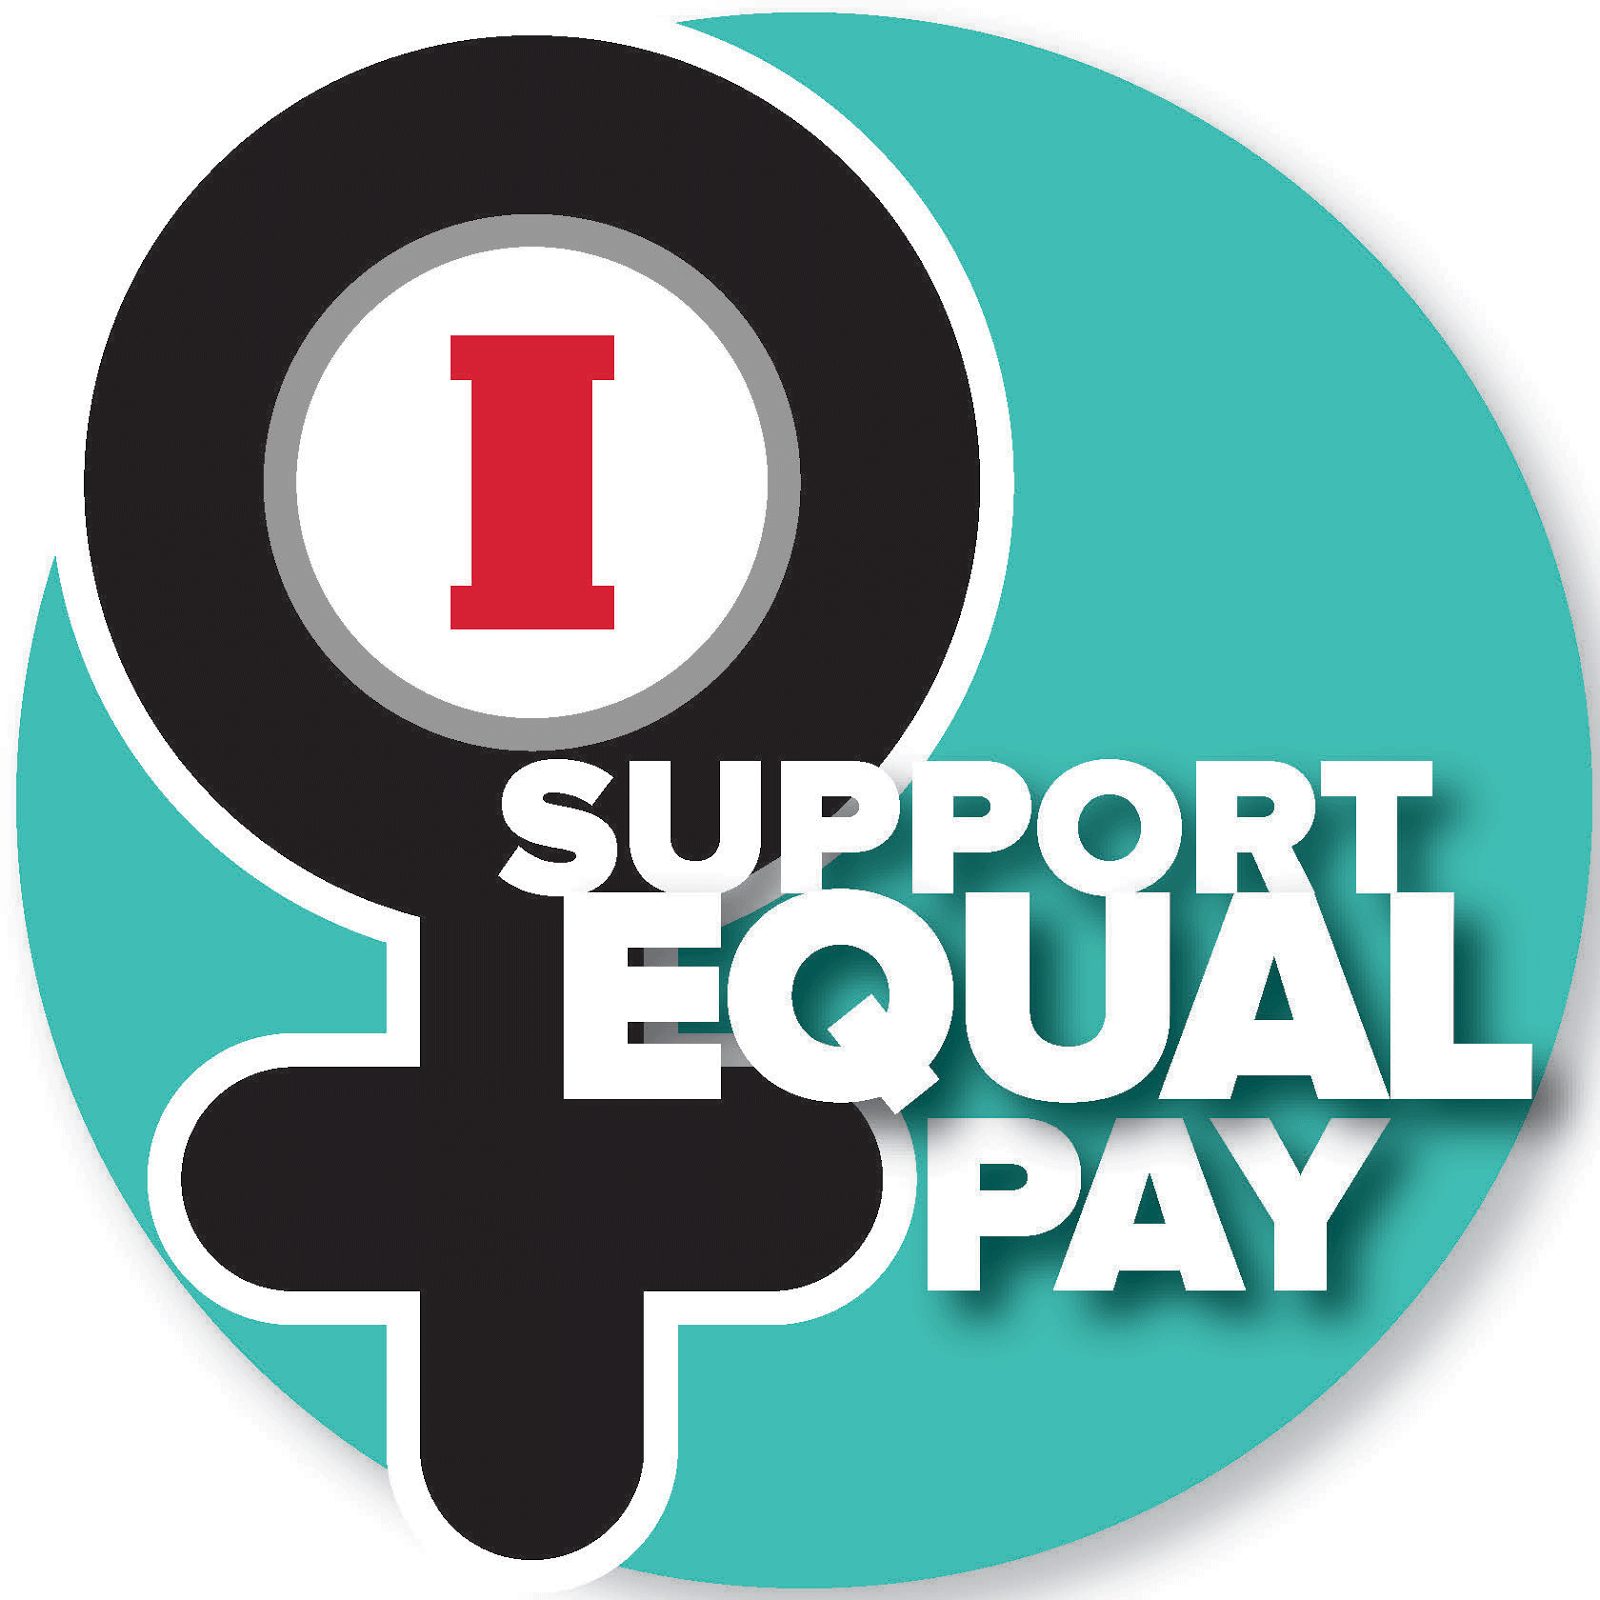 The Equal Pay Act For Women And